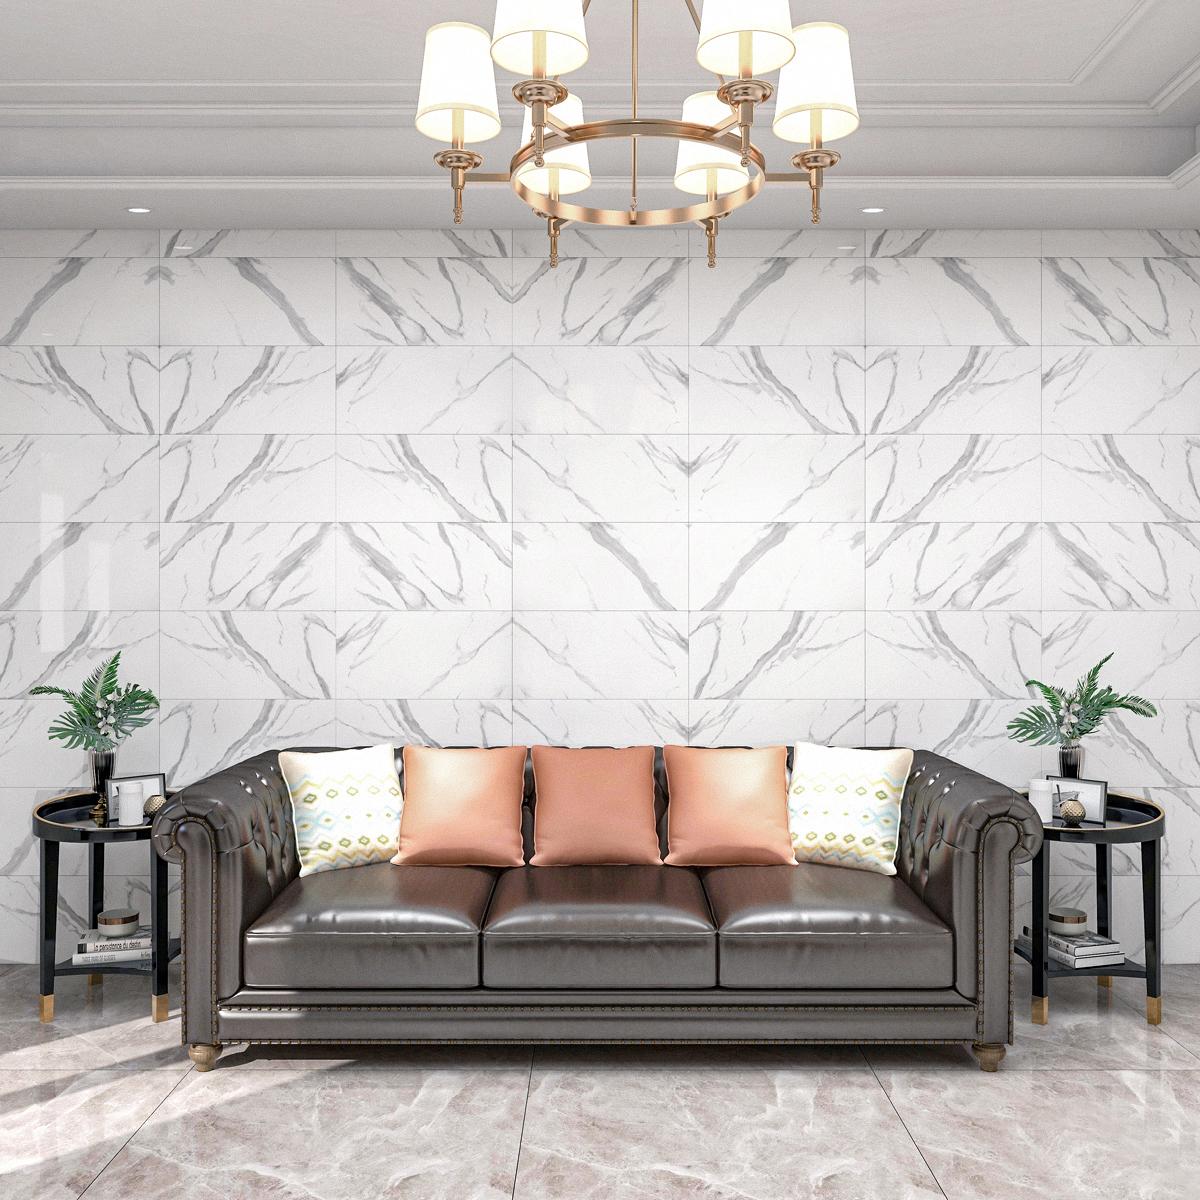 Marble-like wall decoration